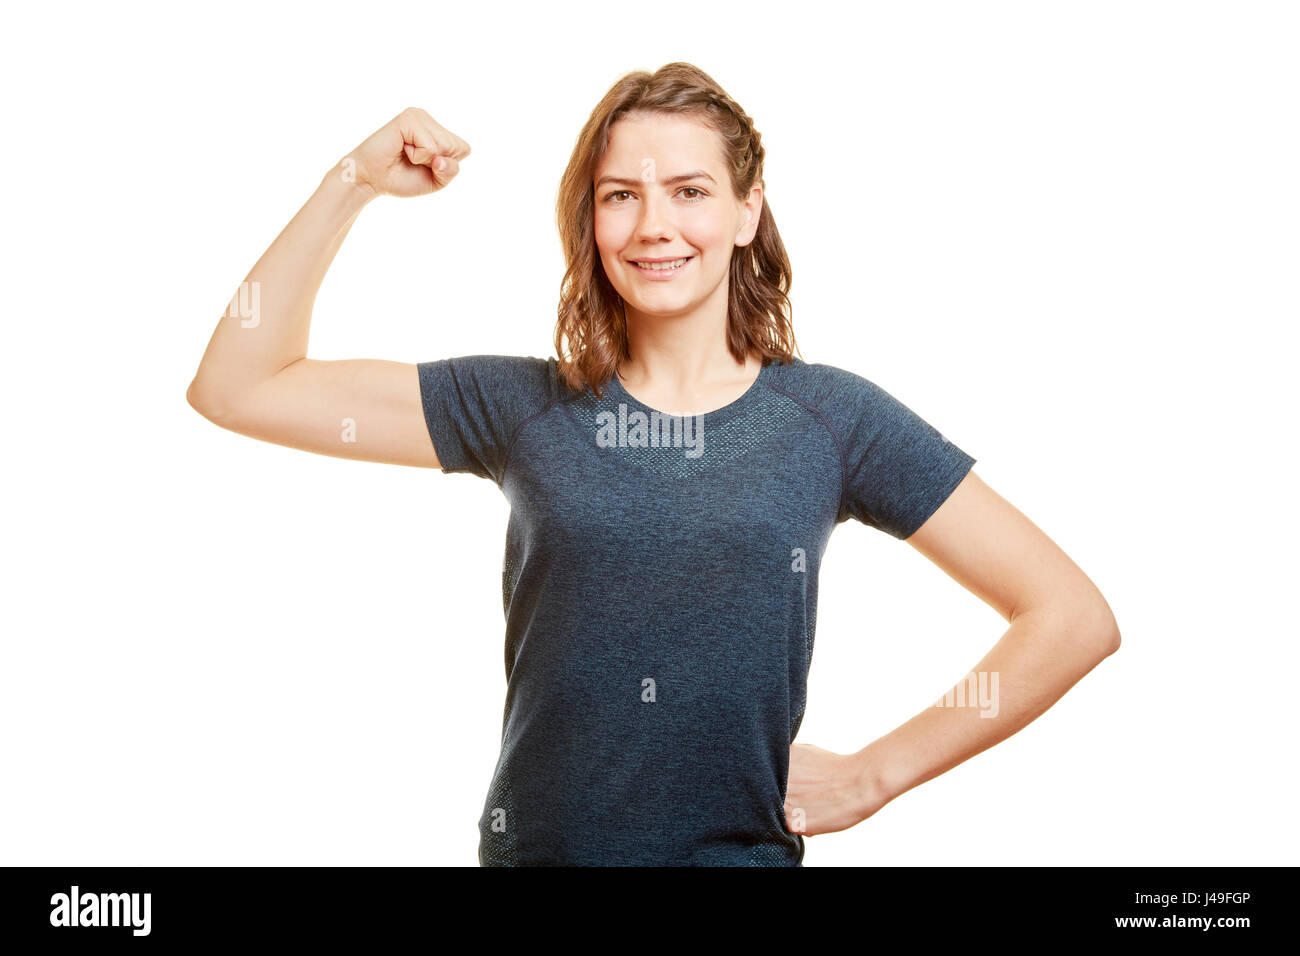 Strong young woman as Personal Trainer shows her tighten muscles Stock Photo